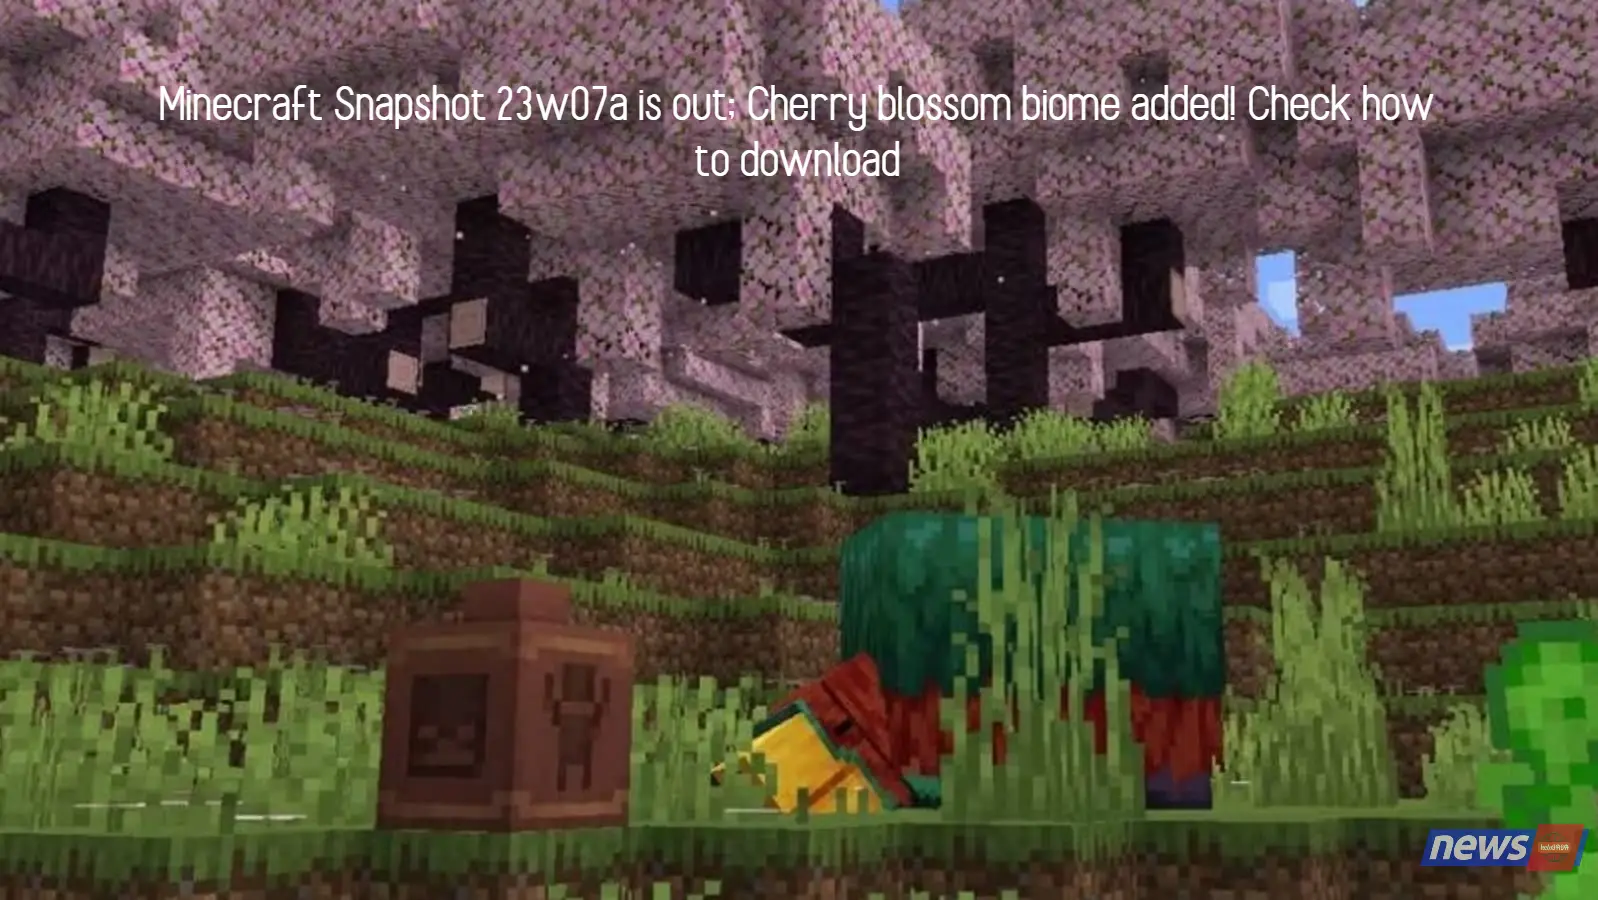 Minecraft Snapshot 23w07a is out; Cherry blossom biome added! Check how to download